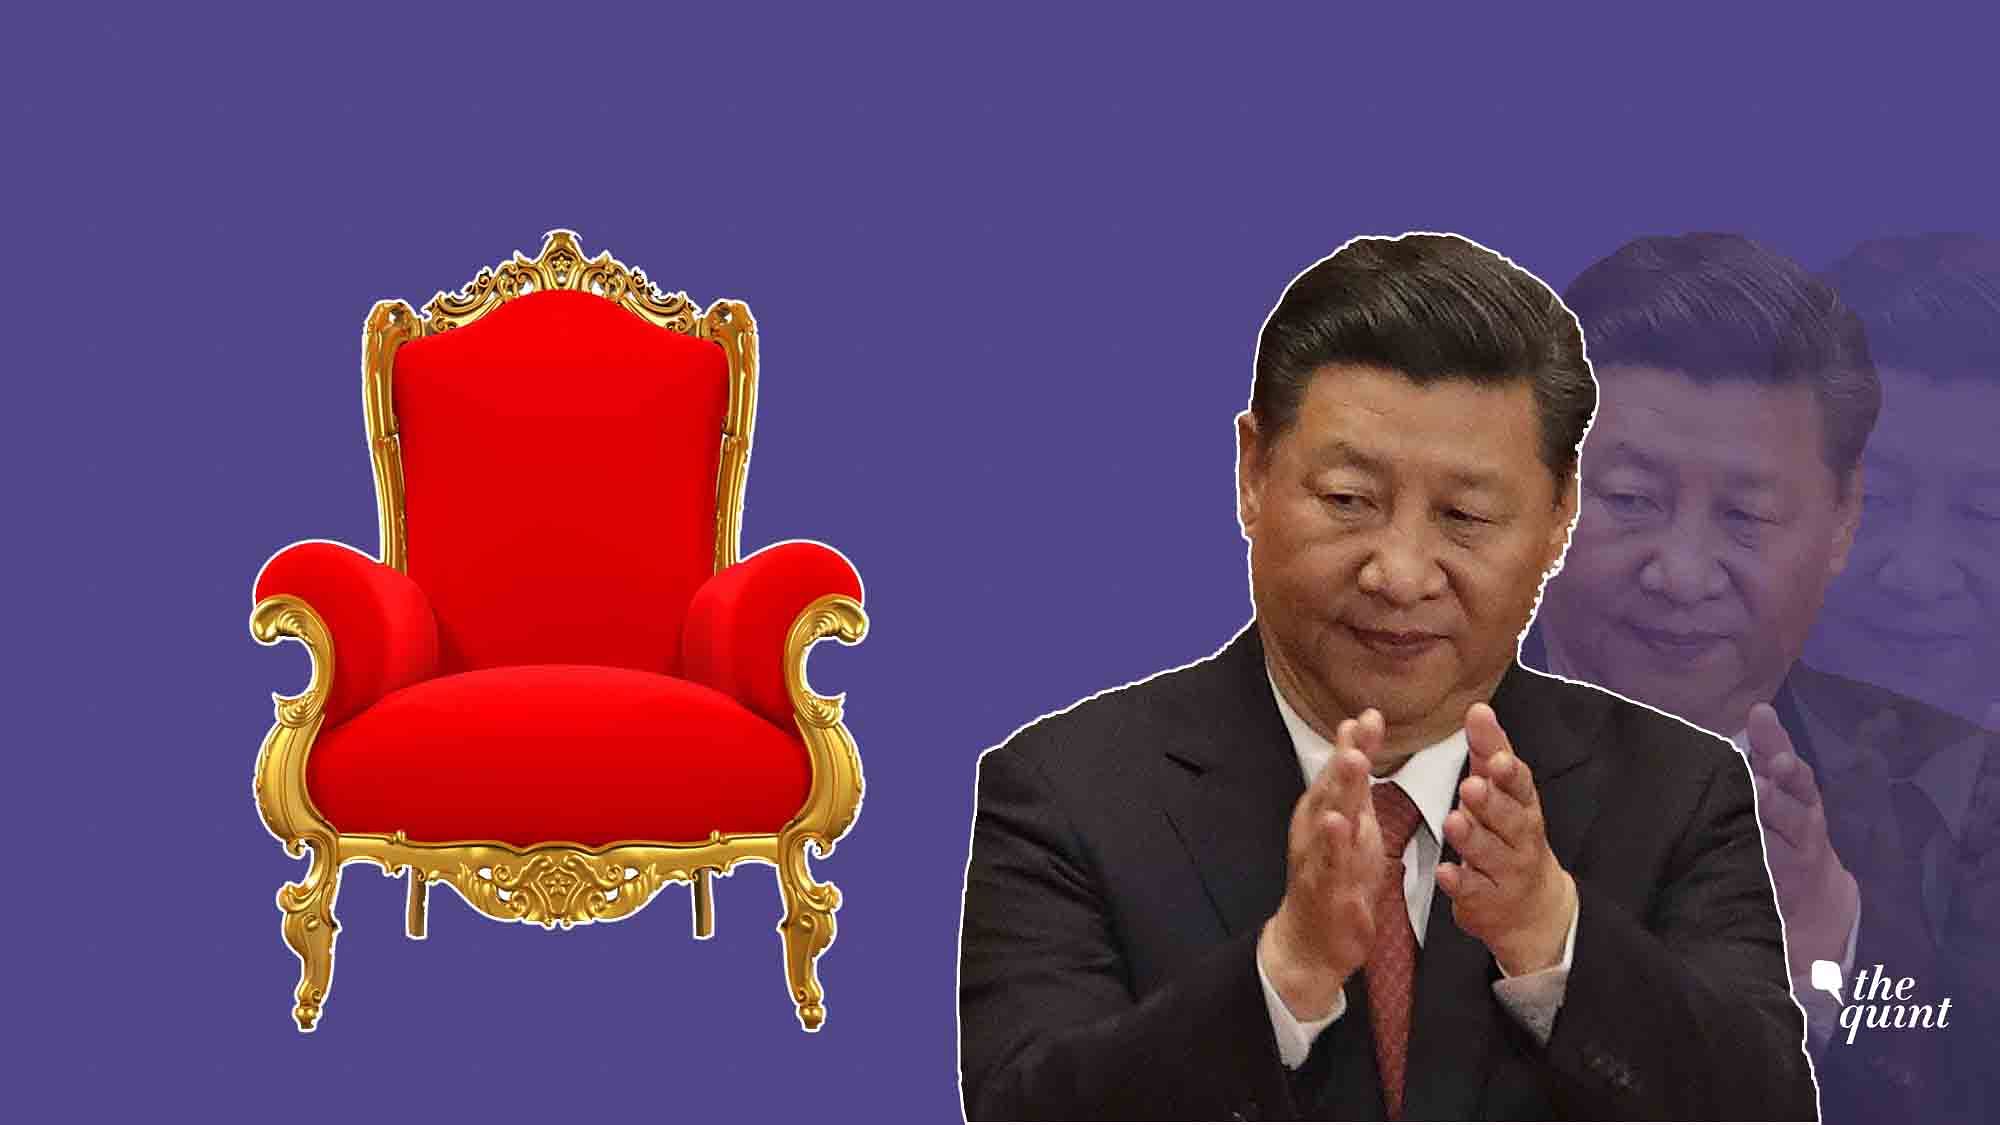 Chinese Premiere Xi Jinping’s image used for representational purposes.